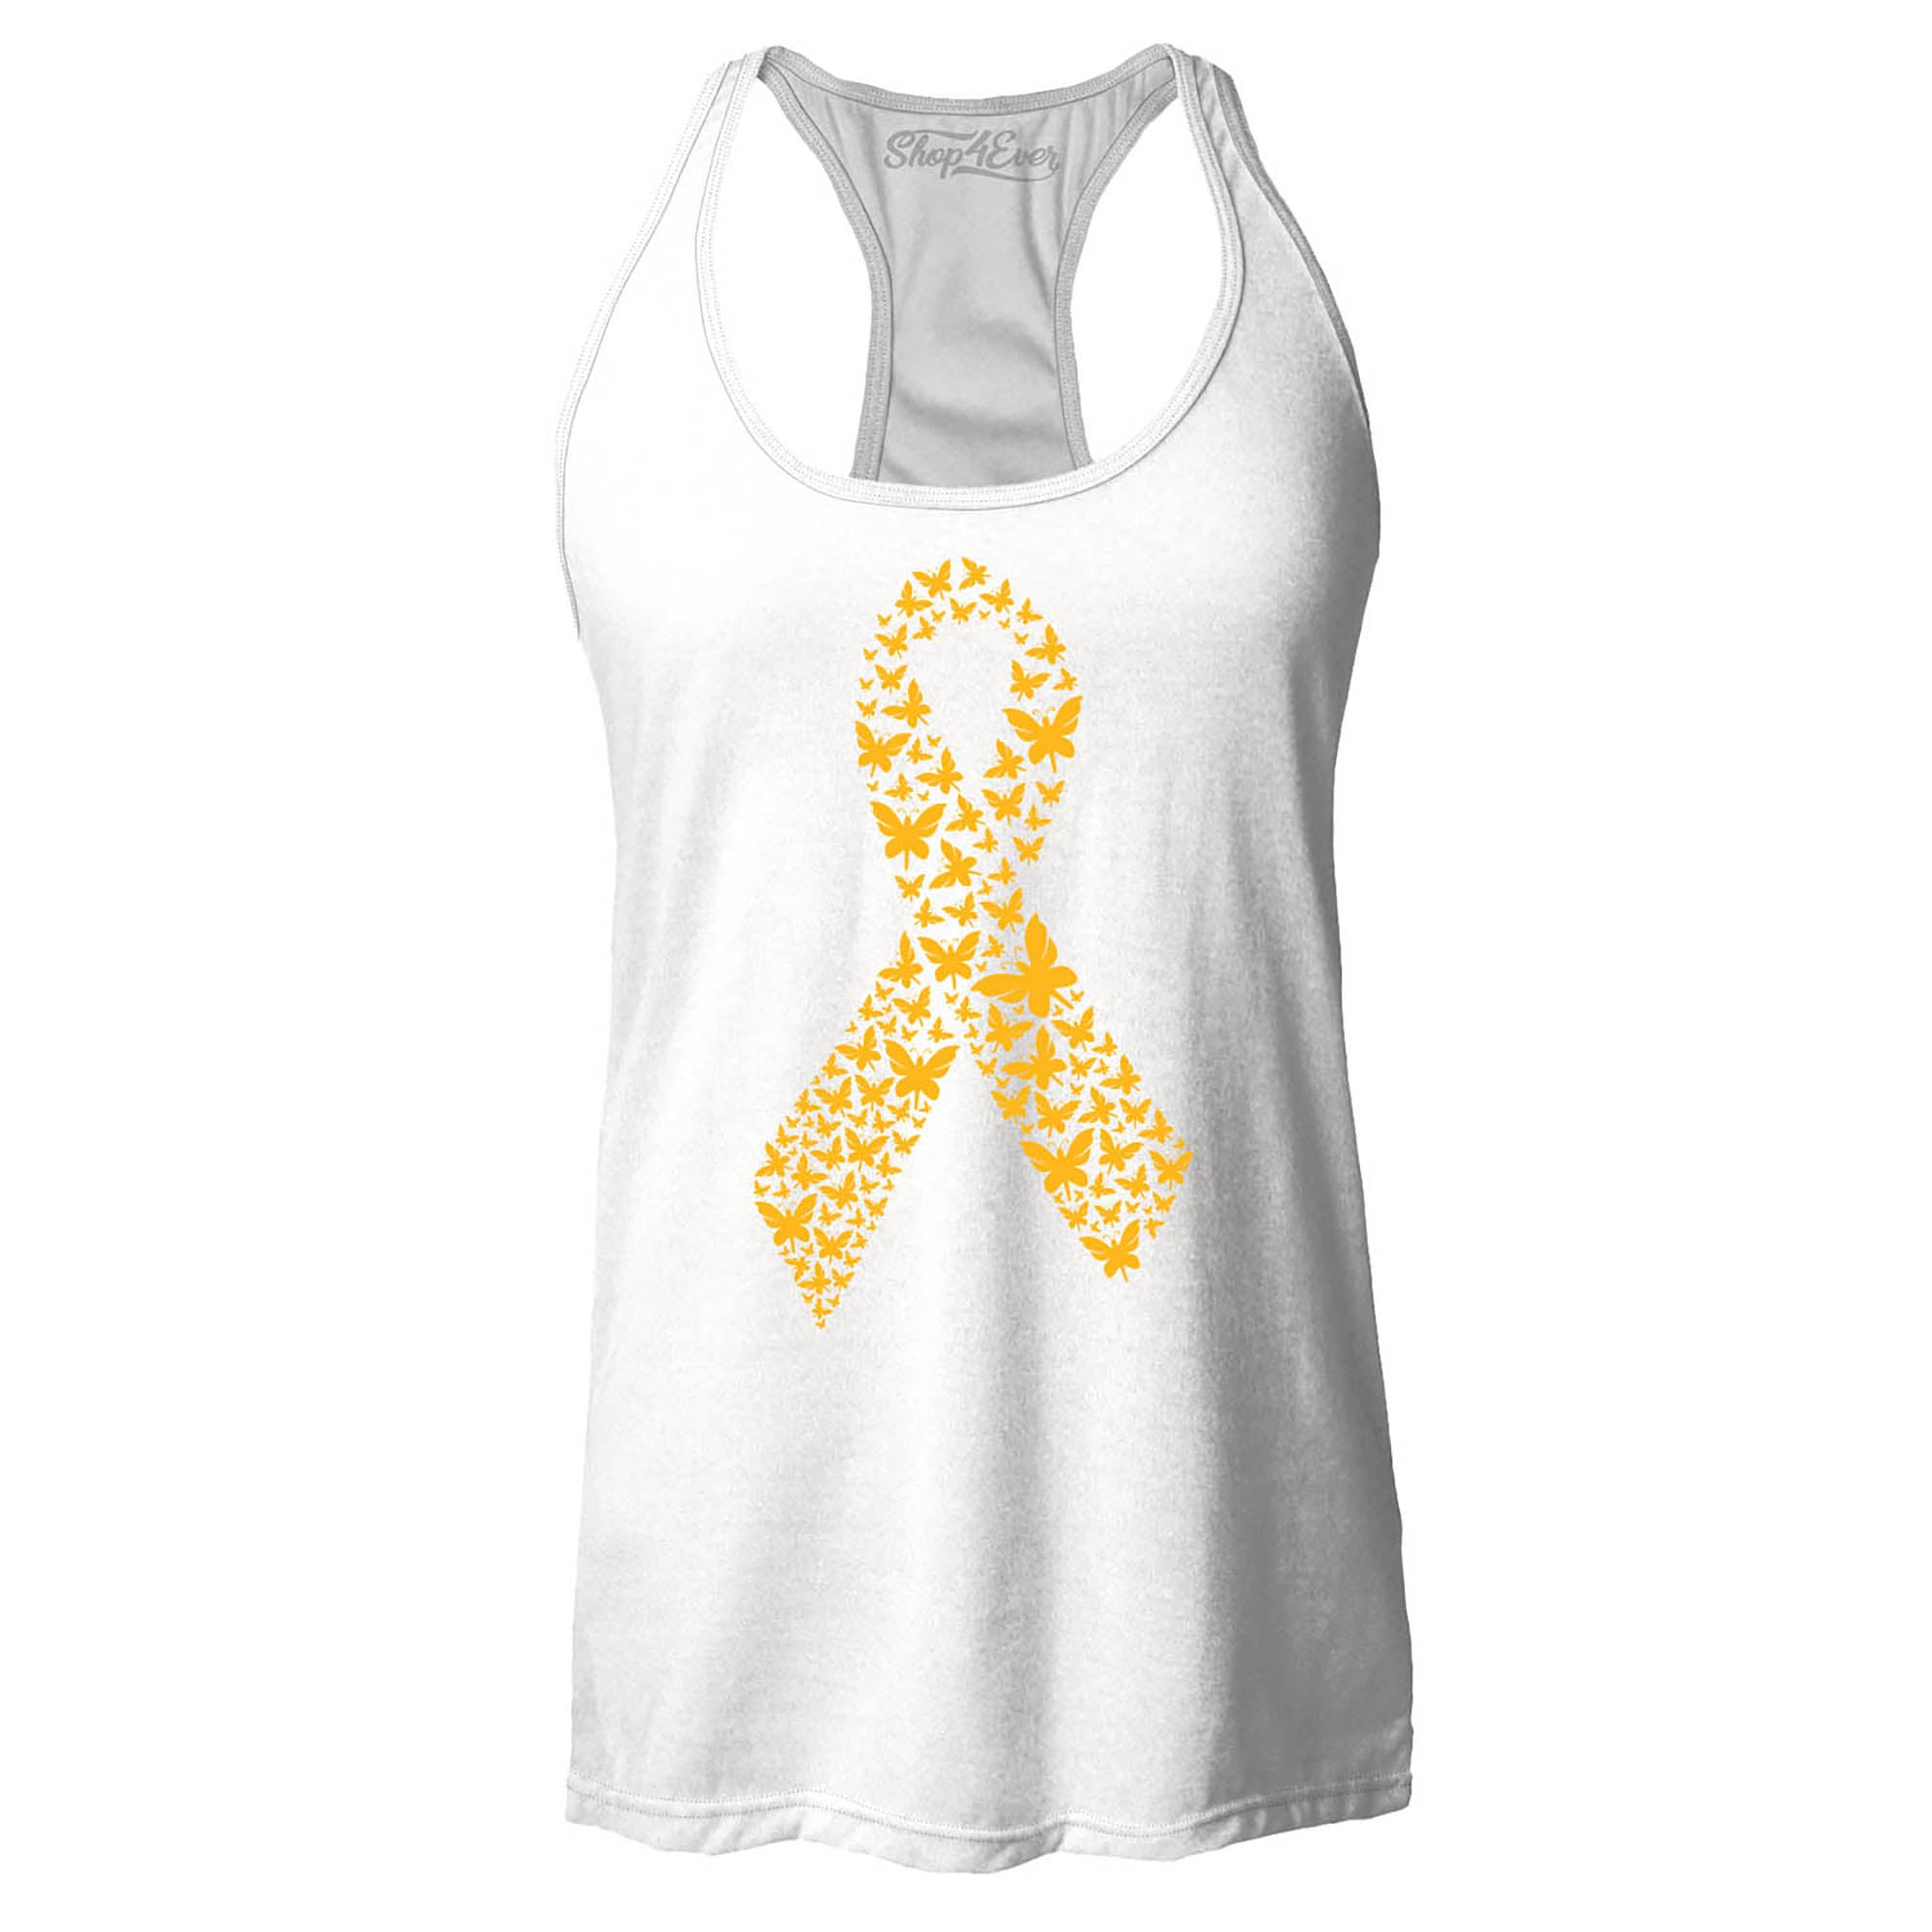 Gold Butterfly Ribbon Childhood Cancer Awareness Women's Racerback Tank Top Slim Fit